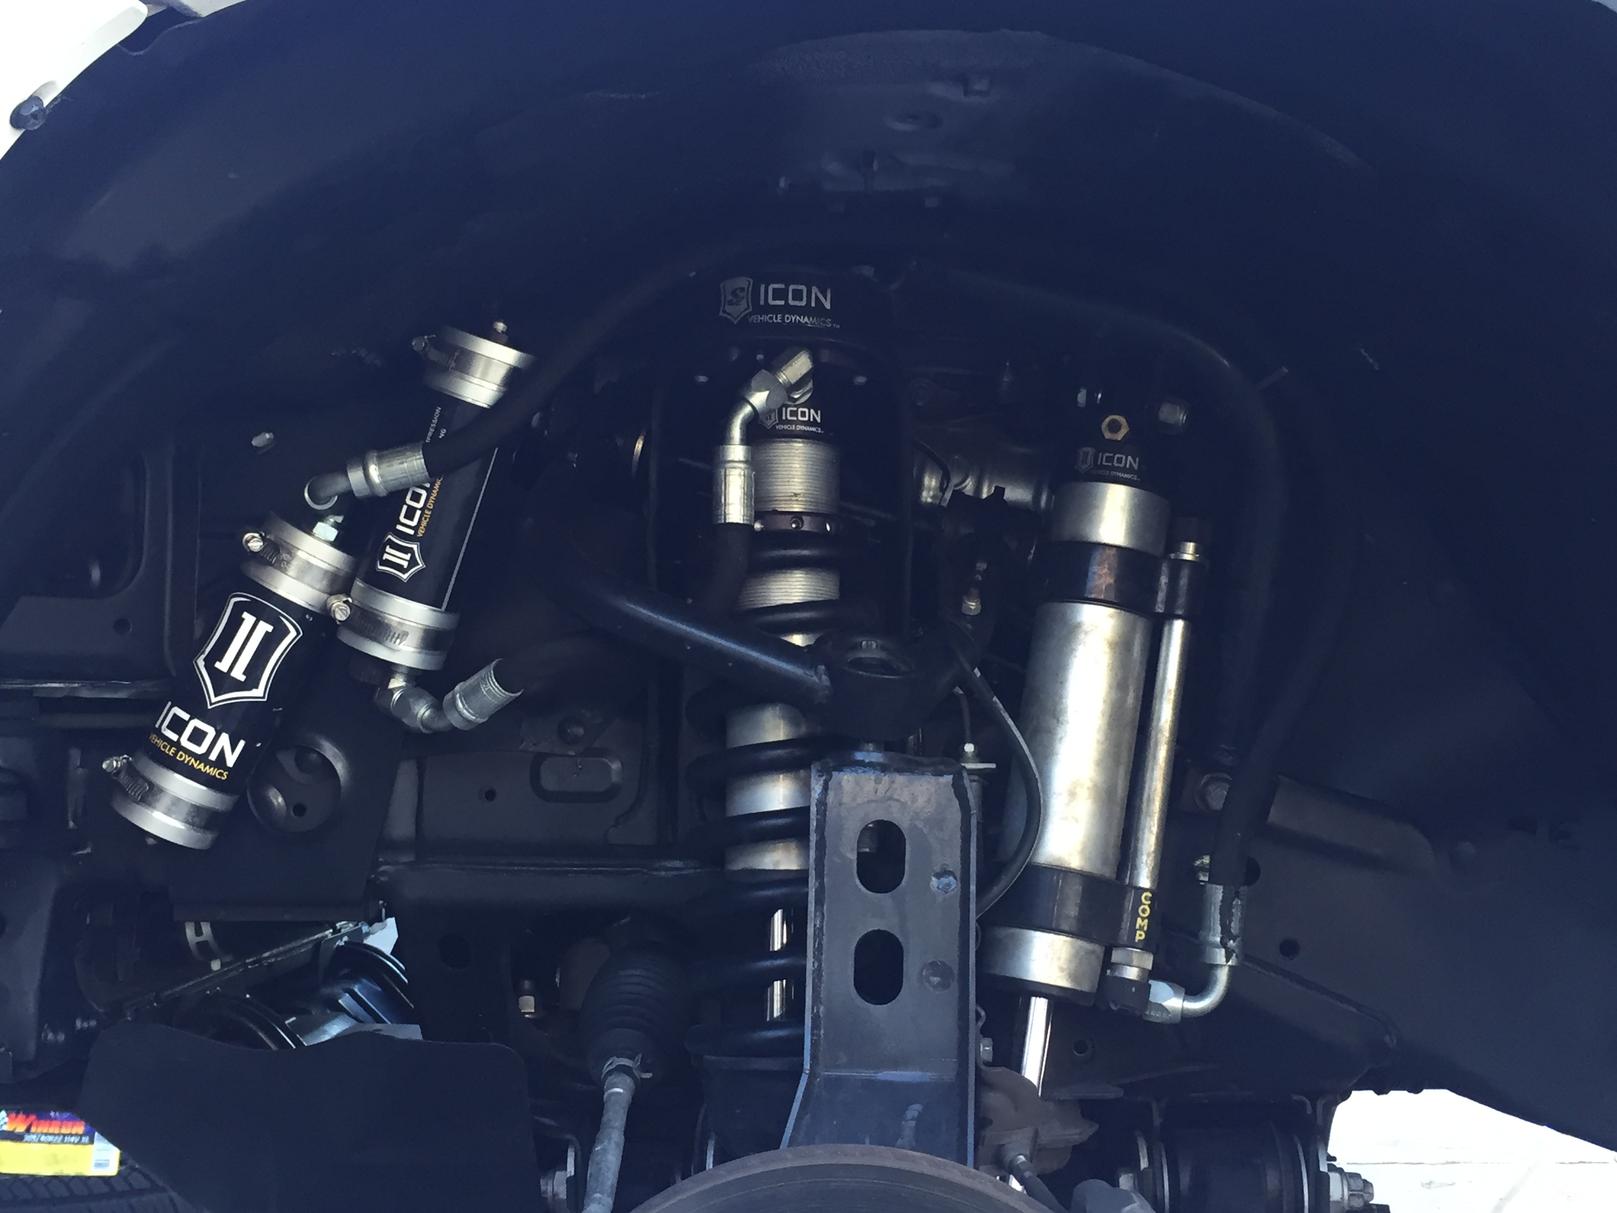 FS: Icon S2 Secondary Shock System with Omega Bypass Shocks - alt=,500 - Los Angeles-img_7353-jpg